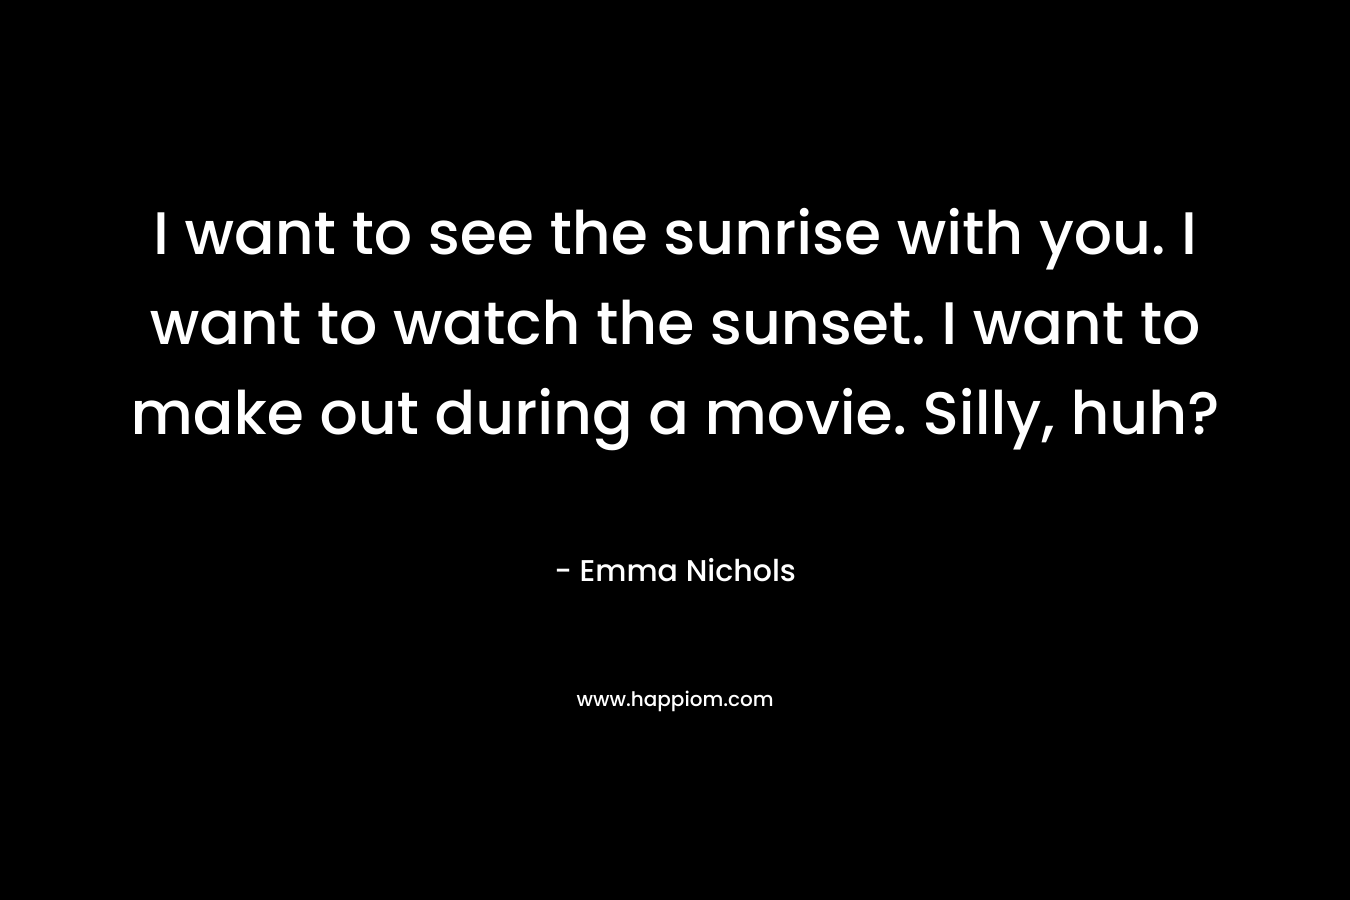 I want to see the sunrise with you. I want to watch the sunset. I want to make out during a movie. Silly, huh?